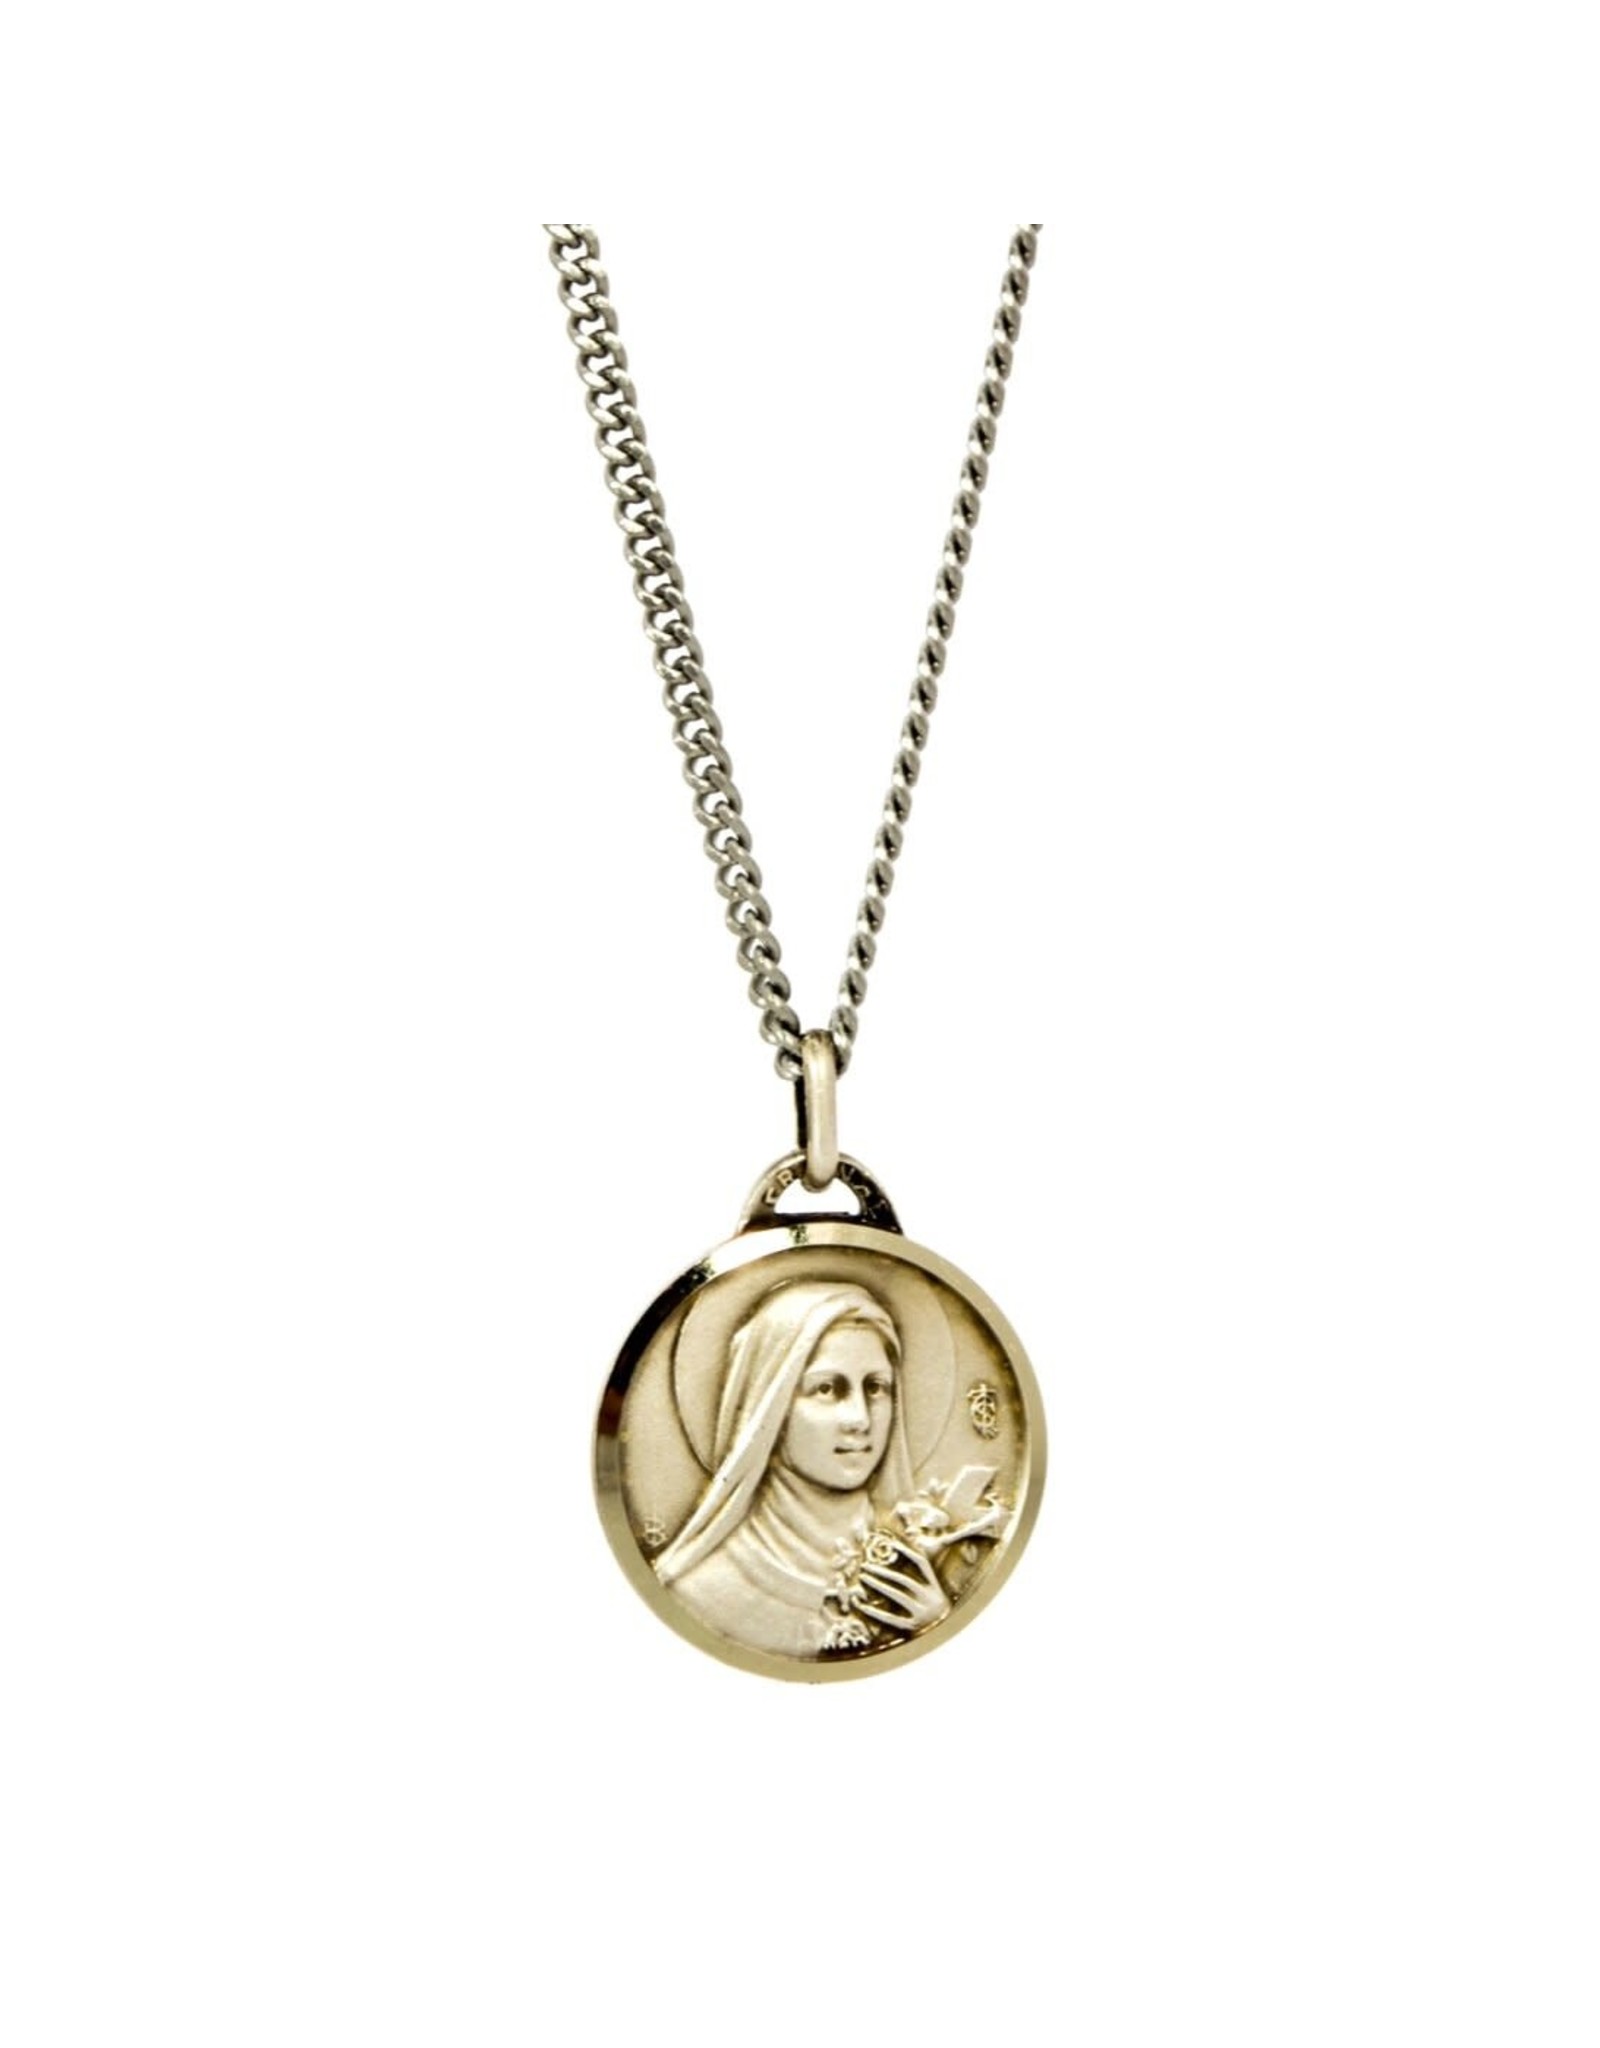 Shomali St. Therese Medal with 18" Chain and Velvet Box Silver Plated Made in France